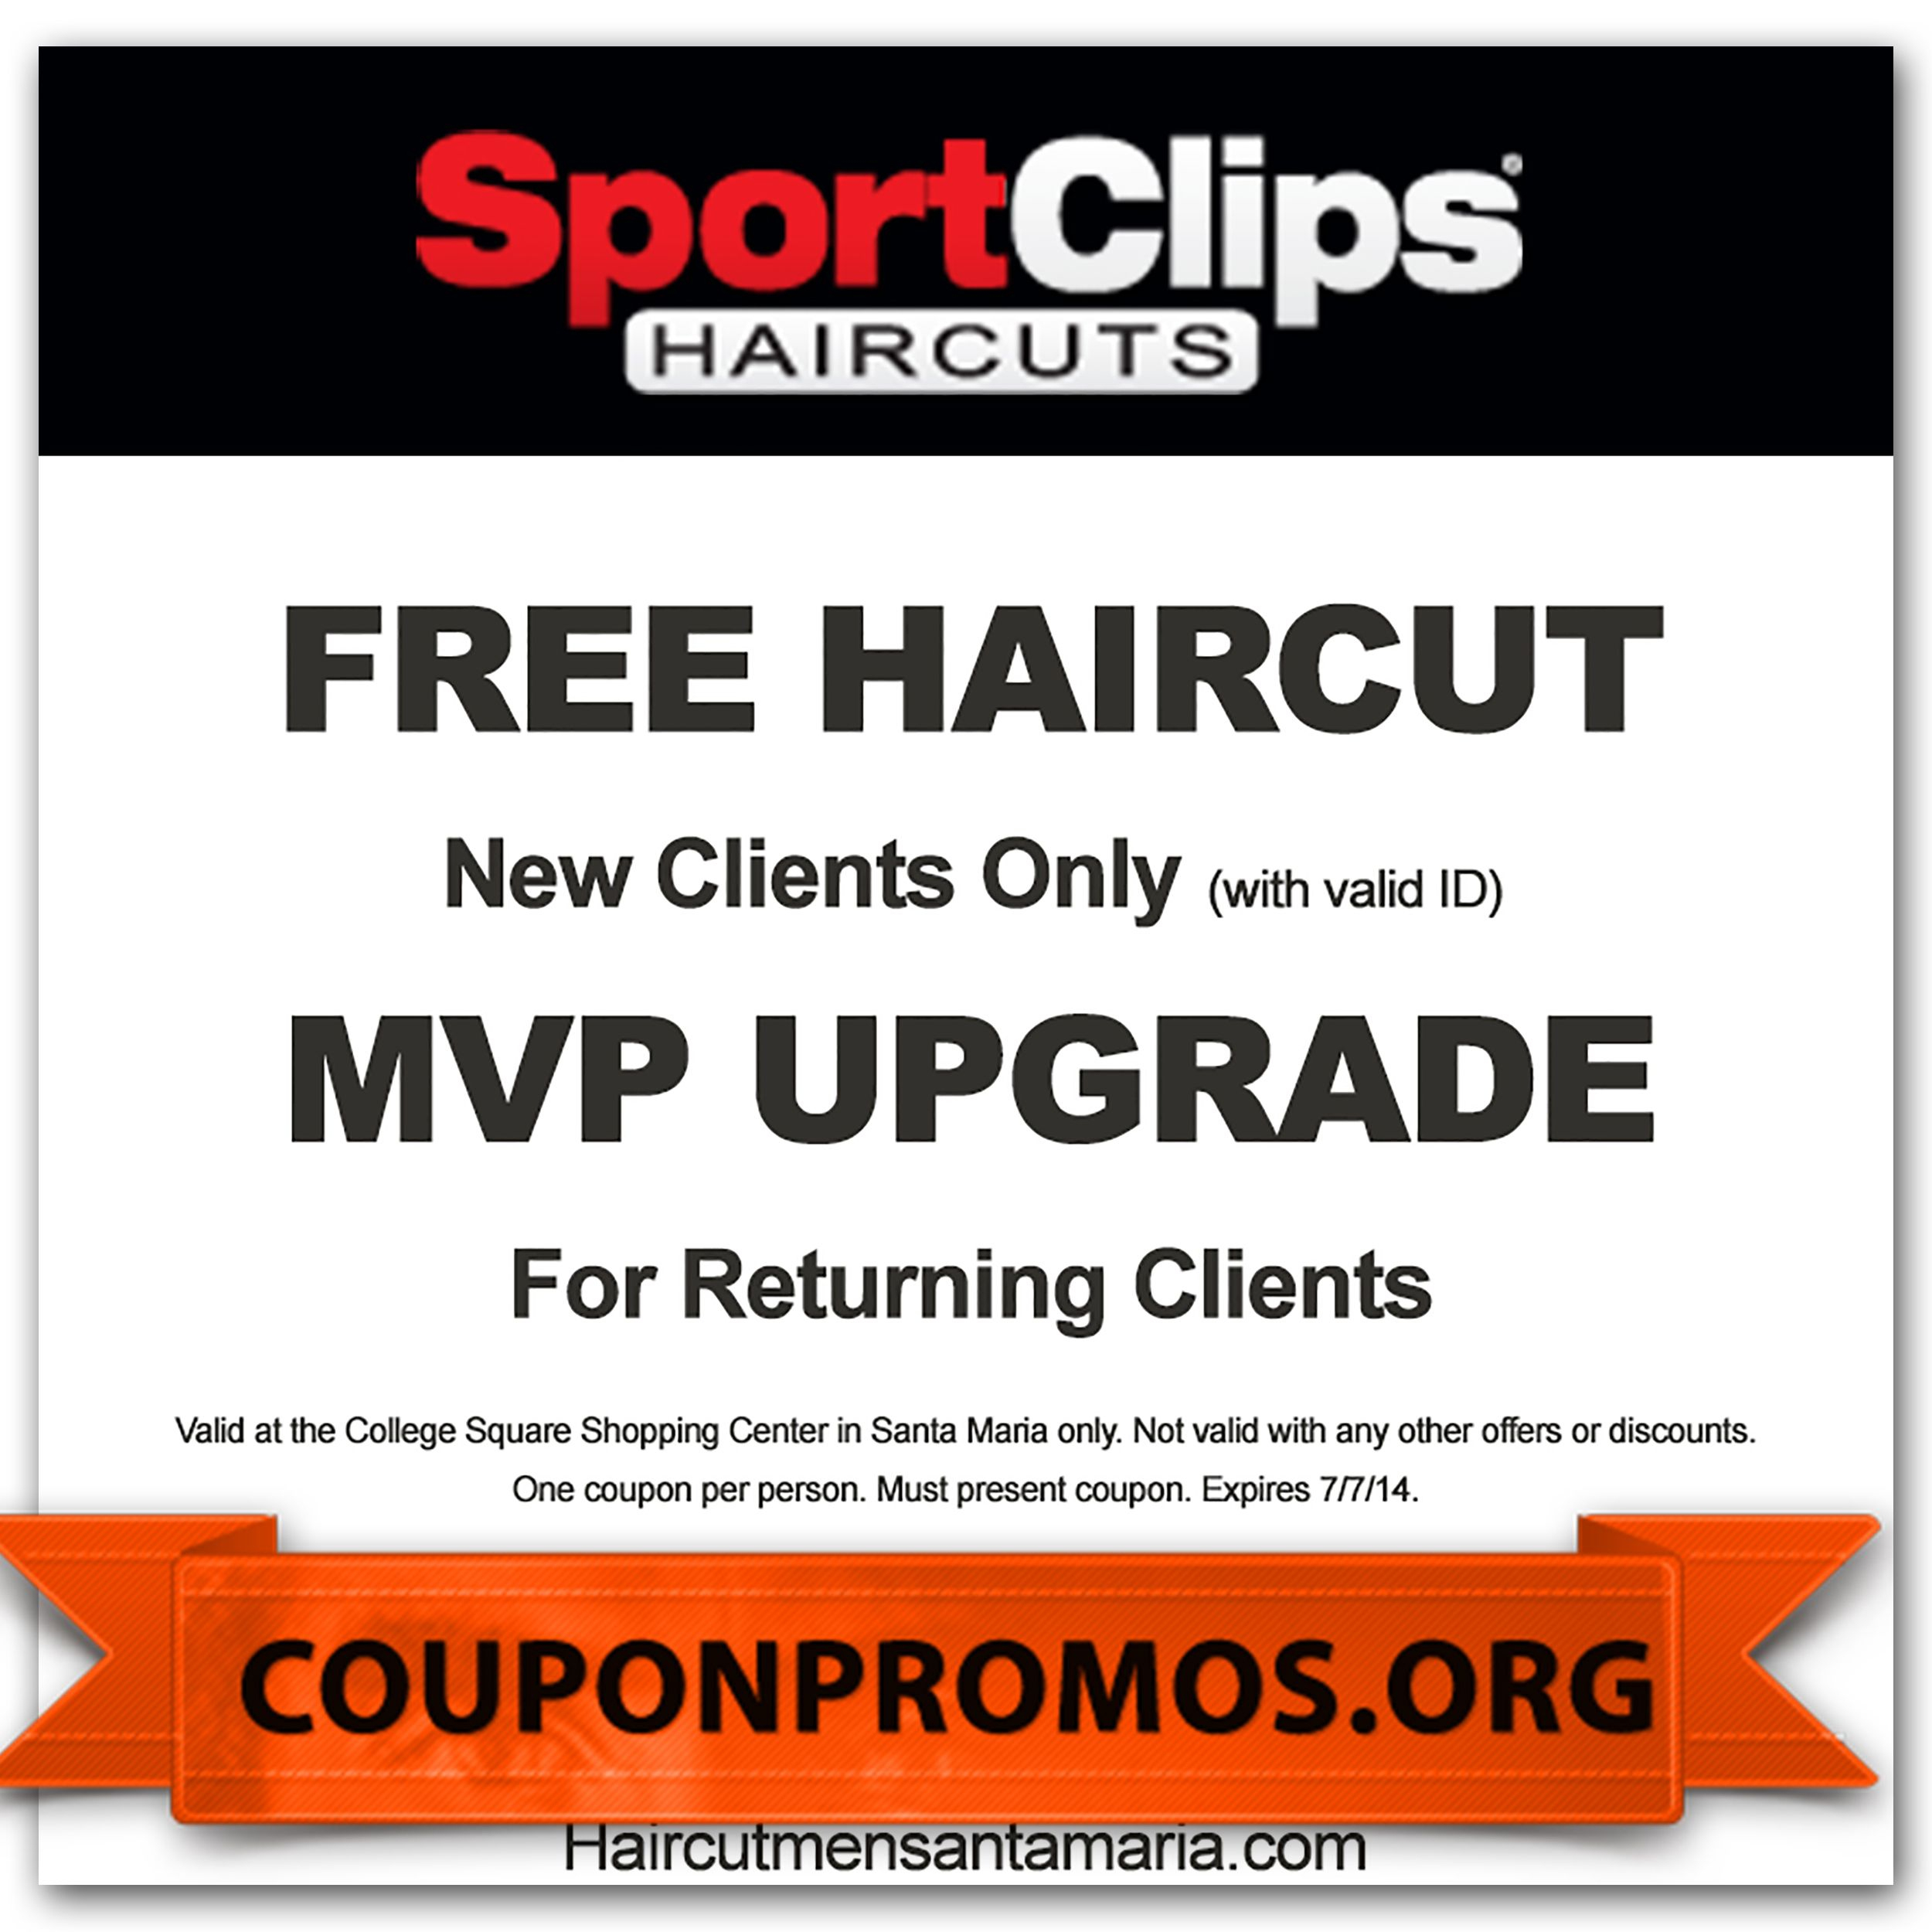 Sports Clips Coupons For November December | Coupons For Free - Great Clips Free Coupons Printable